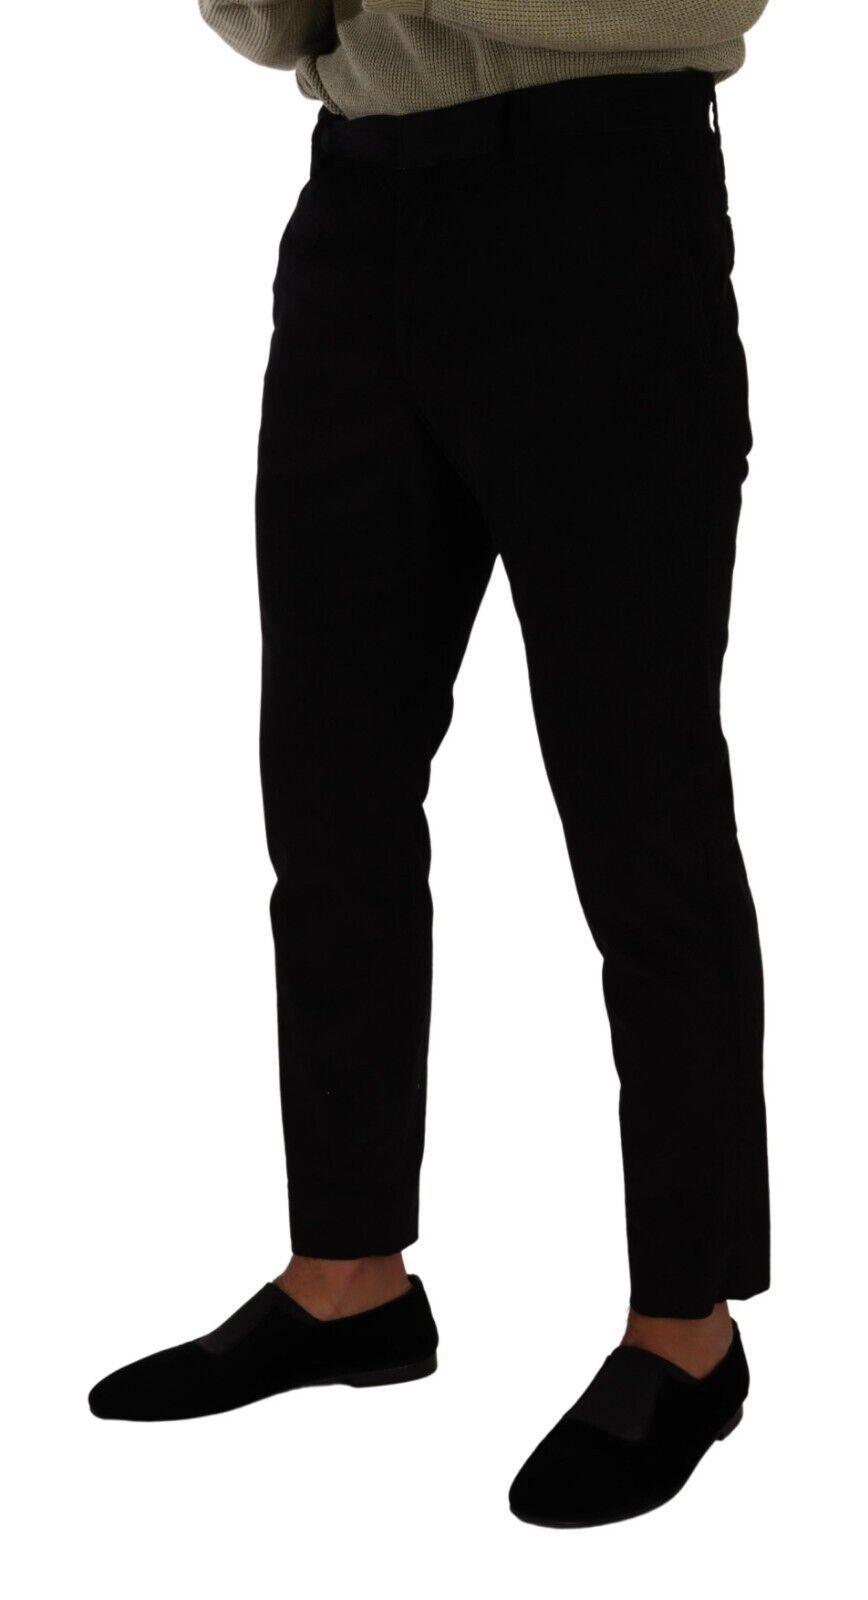 Black Cotton Corduroy Skinny Trouser Pants - Designed by Dolce & Gabbana Available to Buy at a Discounted Price on Moon Behind The Hill Online Designer Discount Store